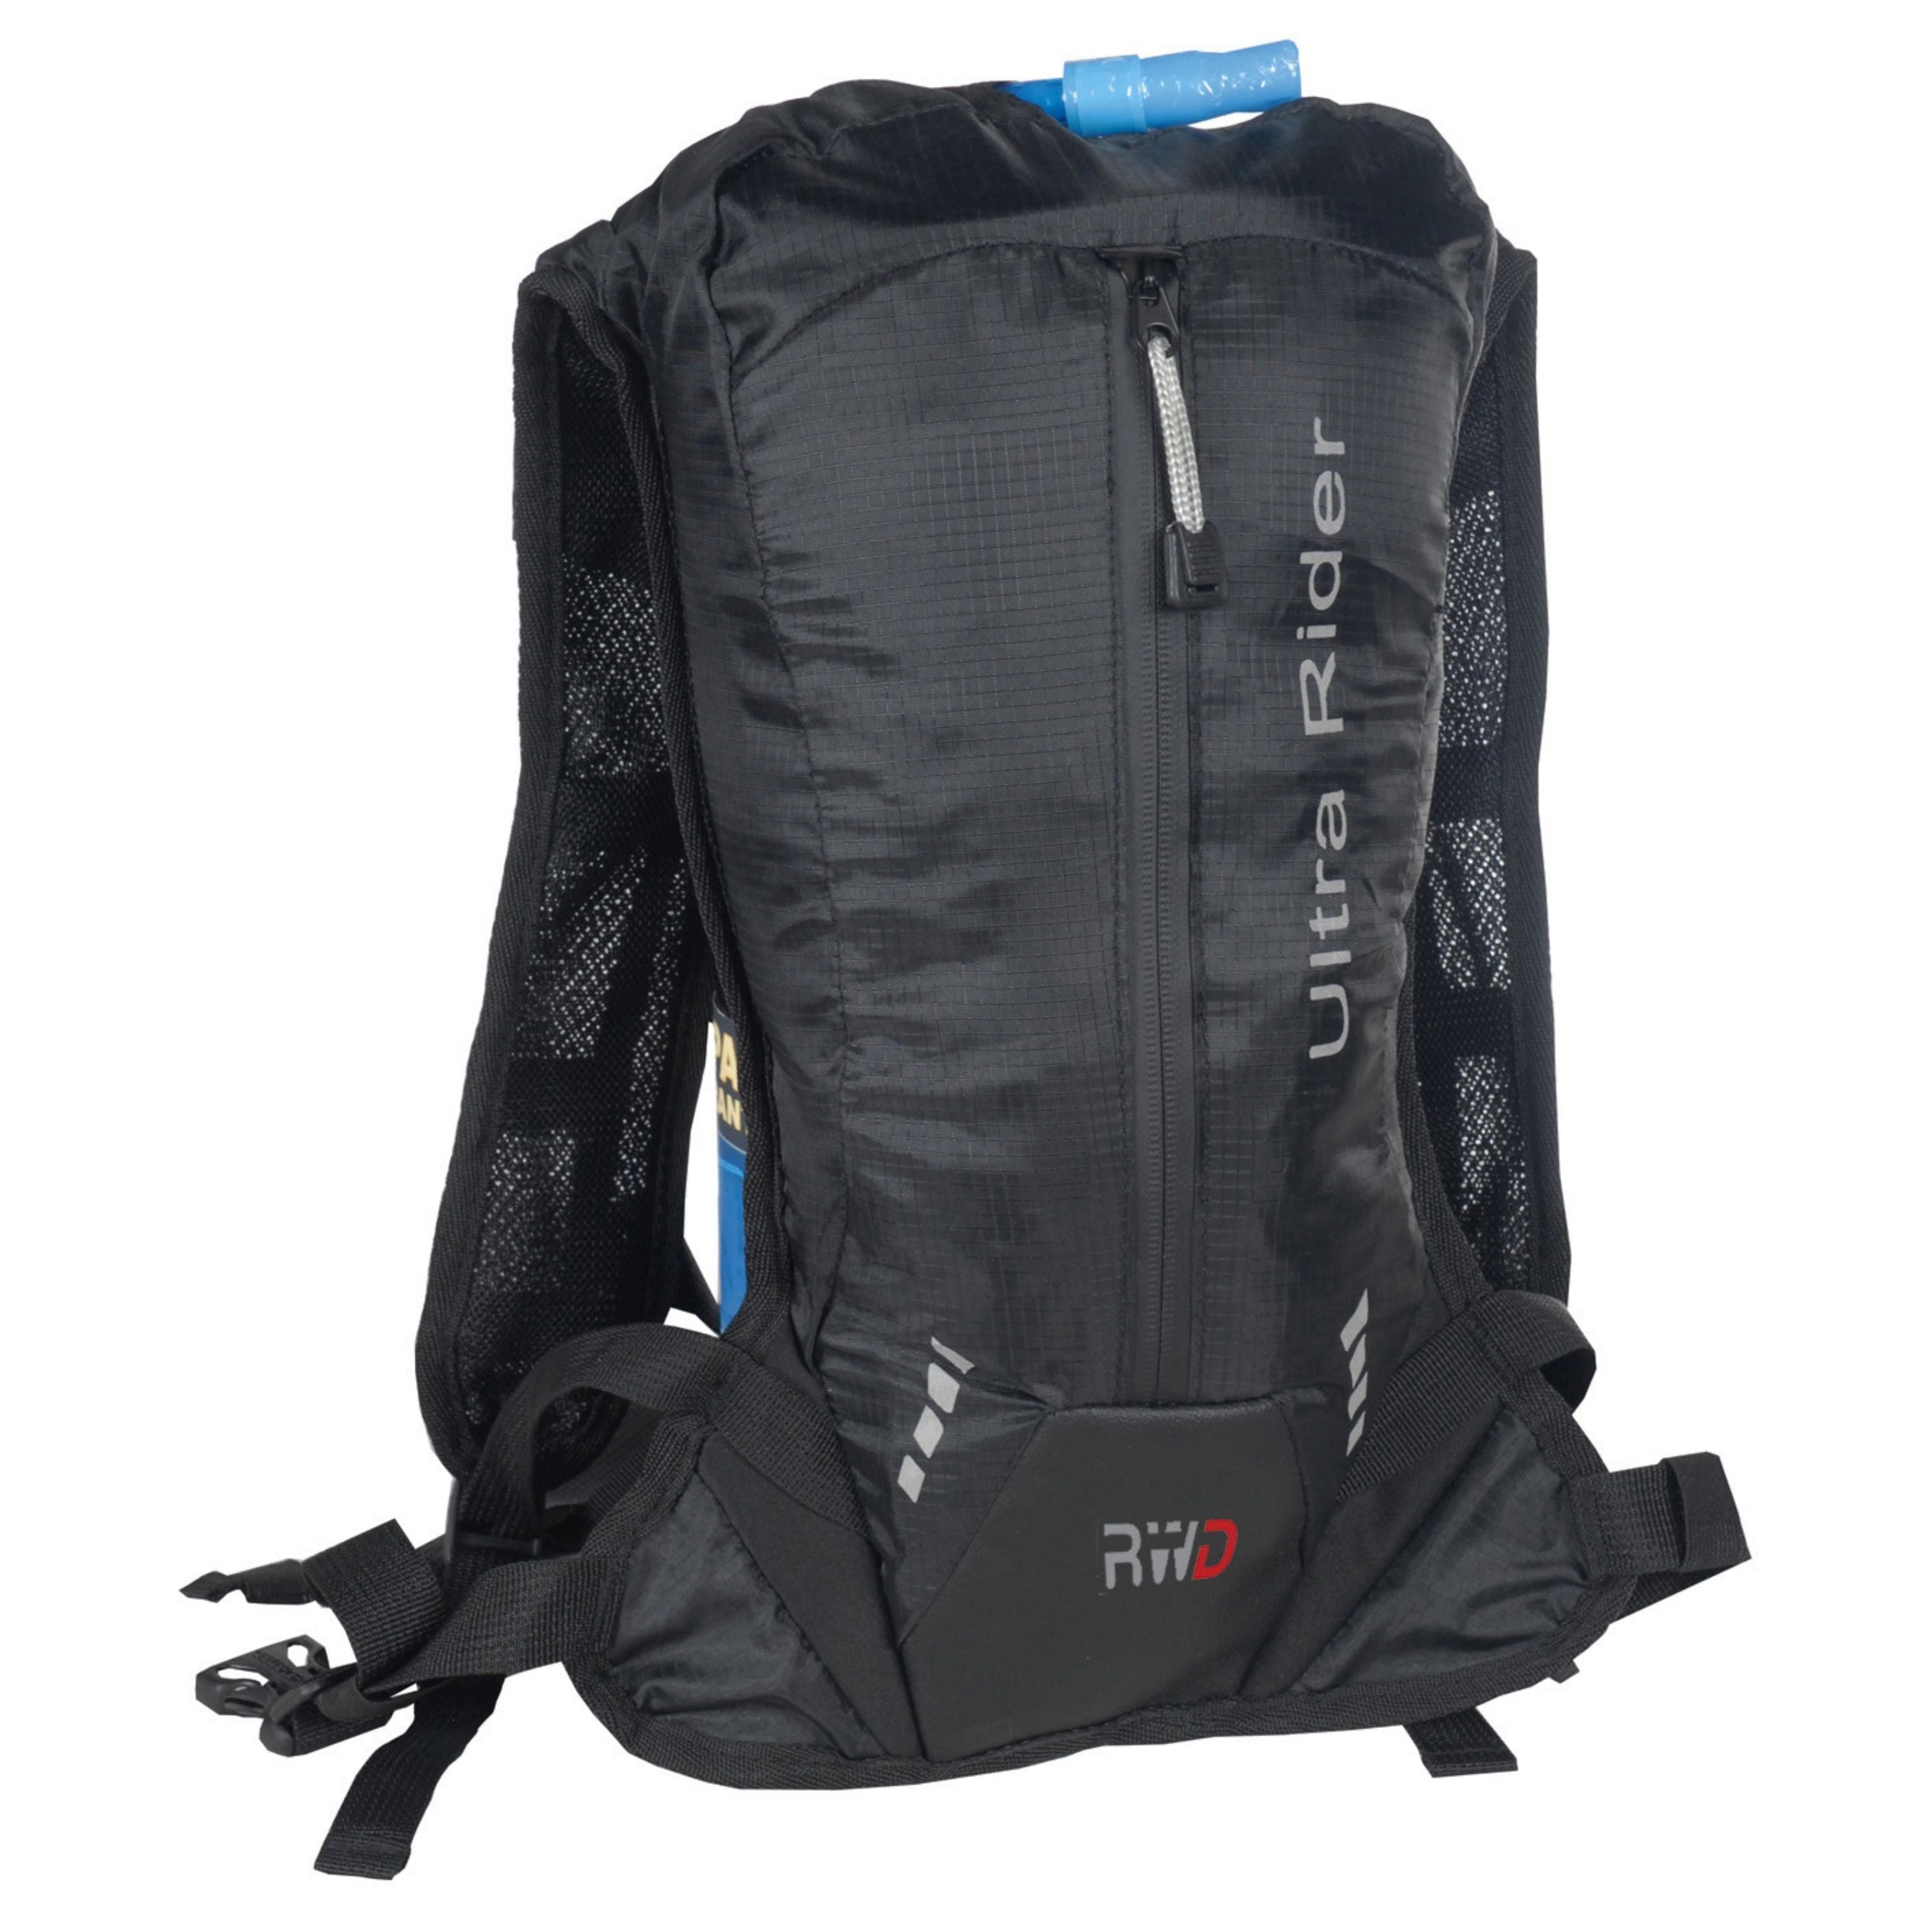 “Hydration” backpack - 1.5 L